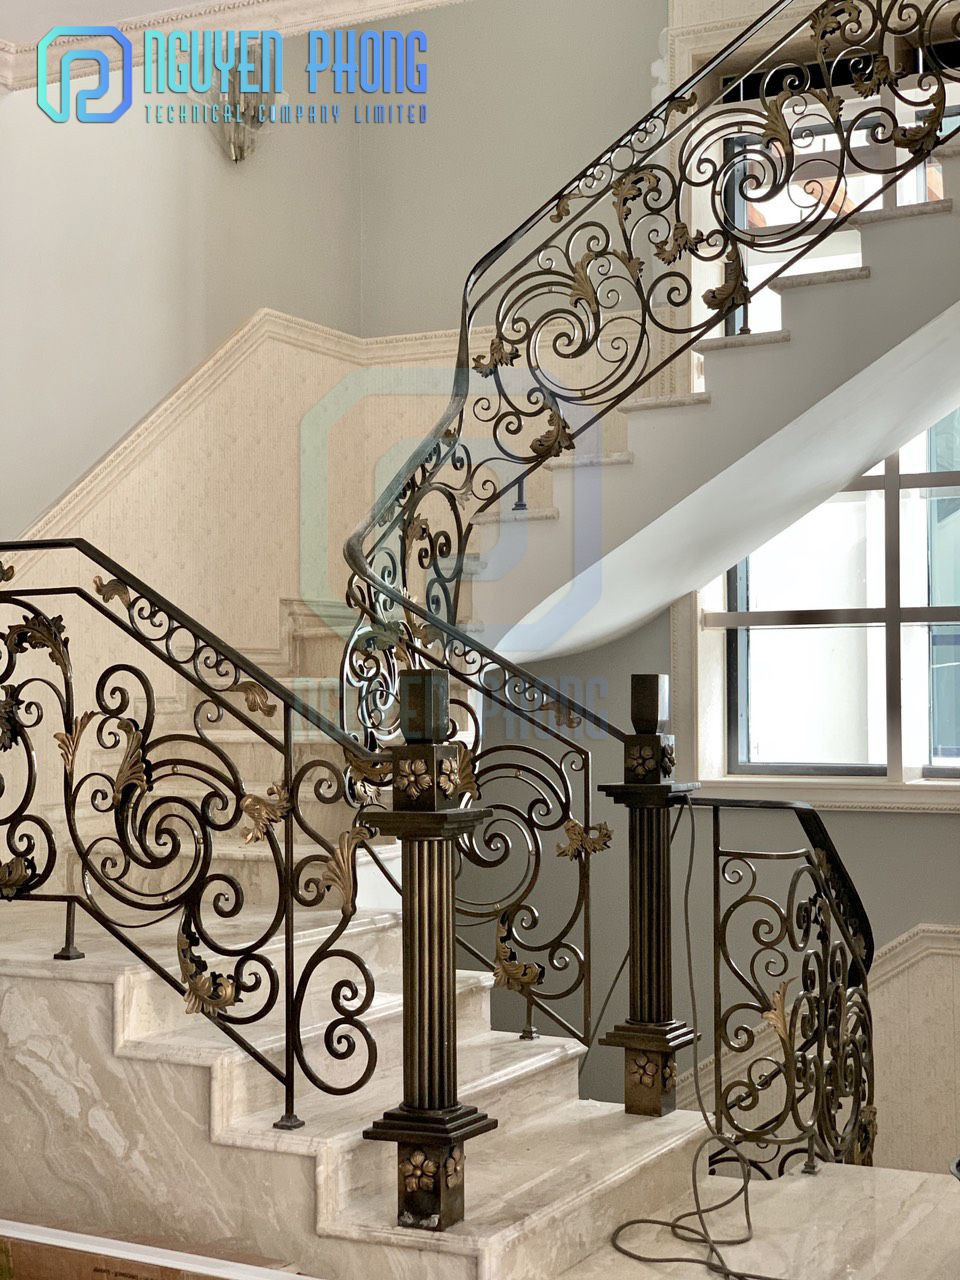 Best Supplier Of Wrought Iron Indoor Railing For Staircases